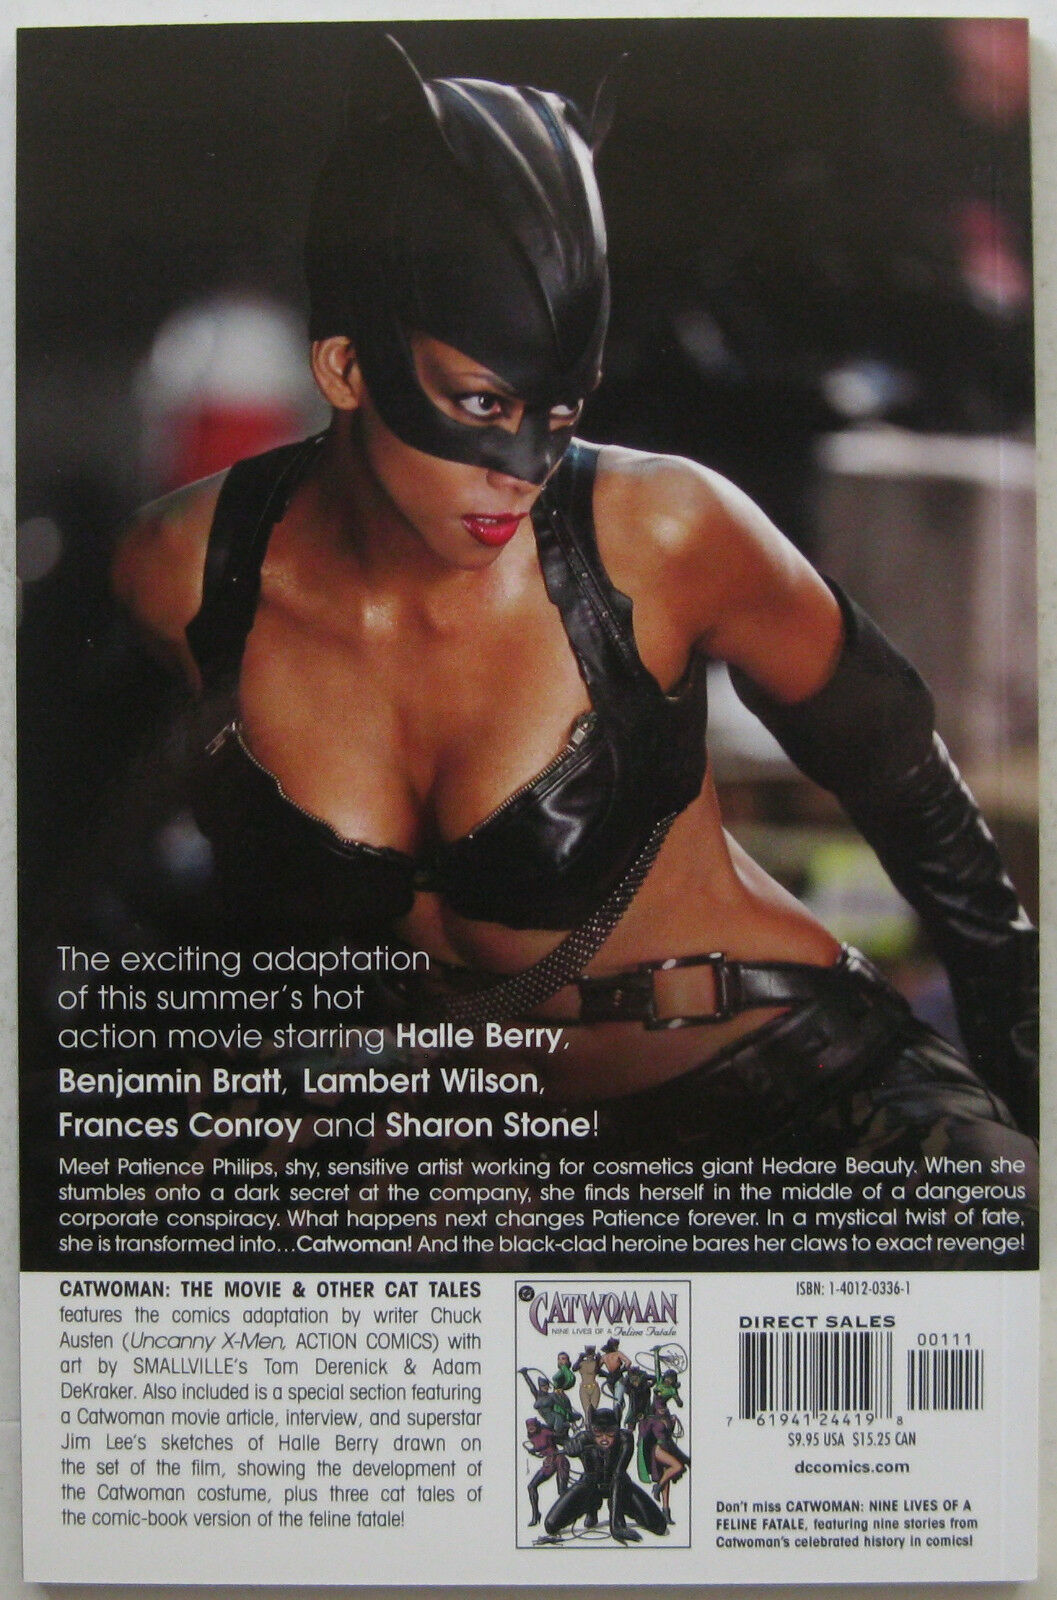 CATWOMAN MOVIE 2004 INKWORKS PROMOTIONAL SELL SALE SHEET HALIE BERRY 